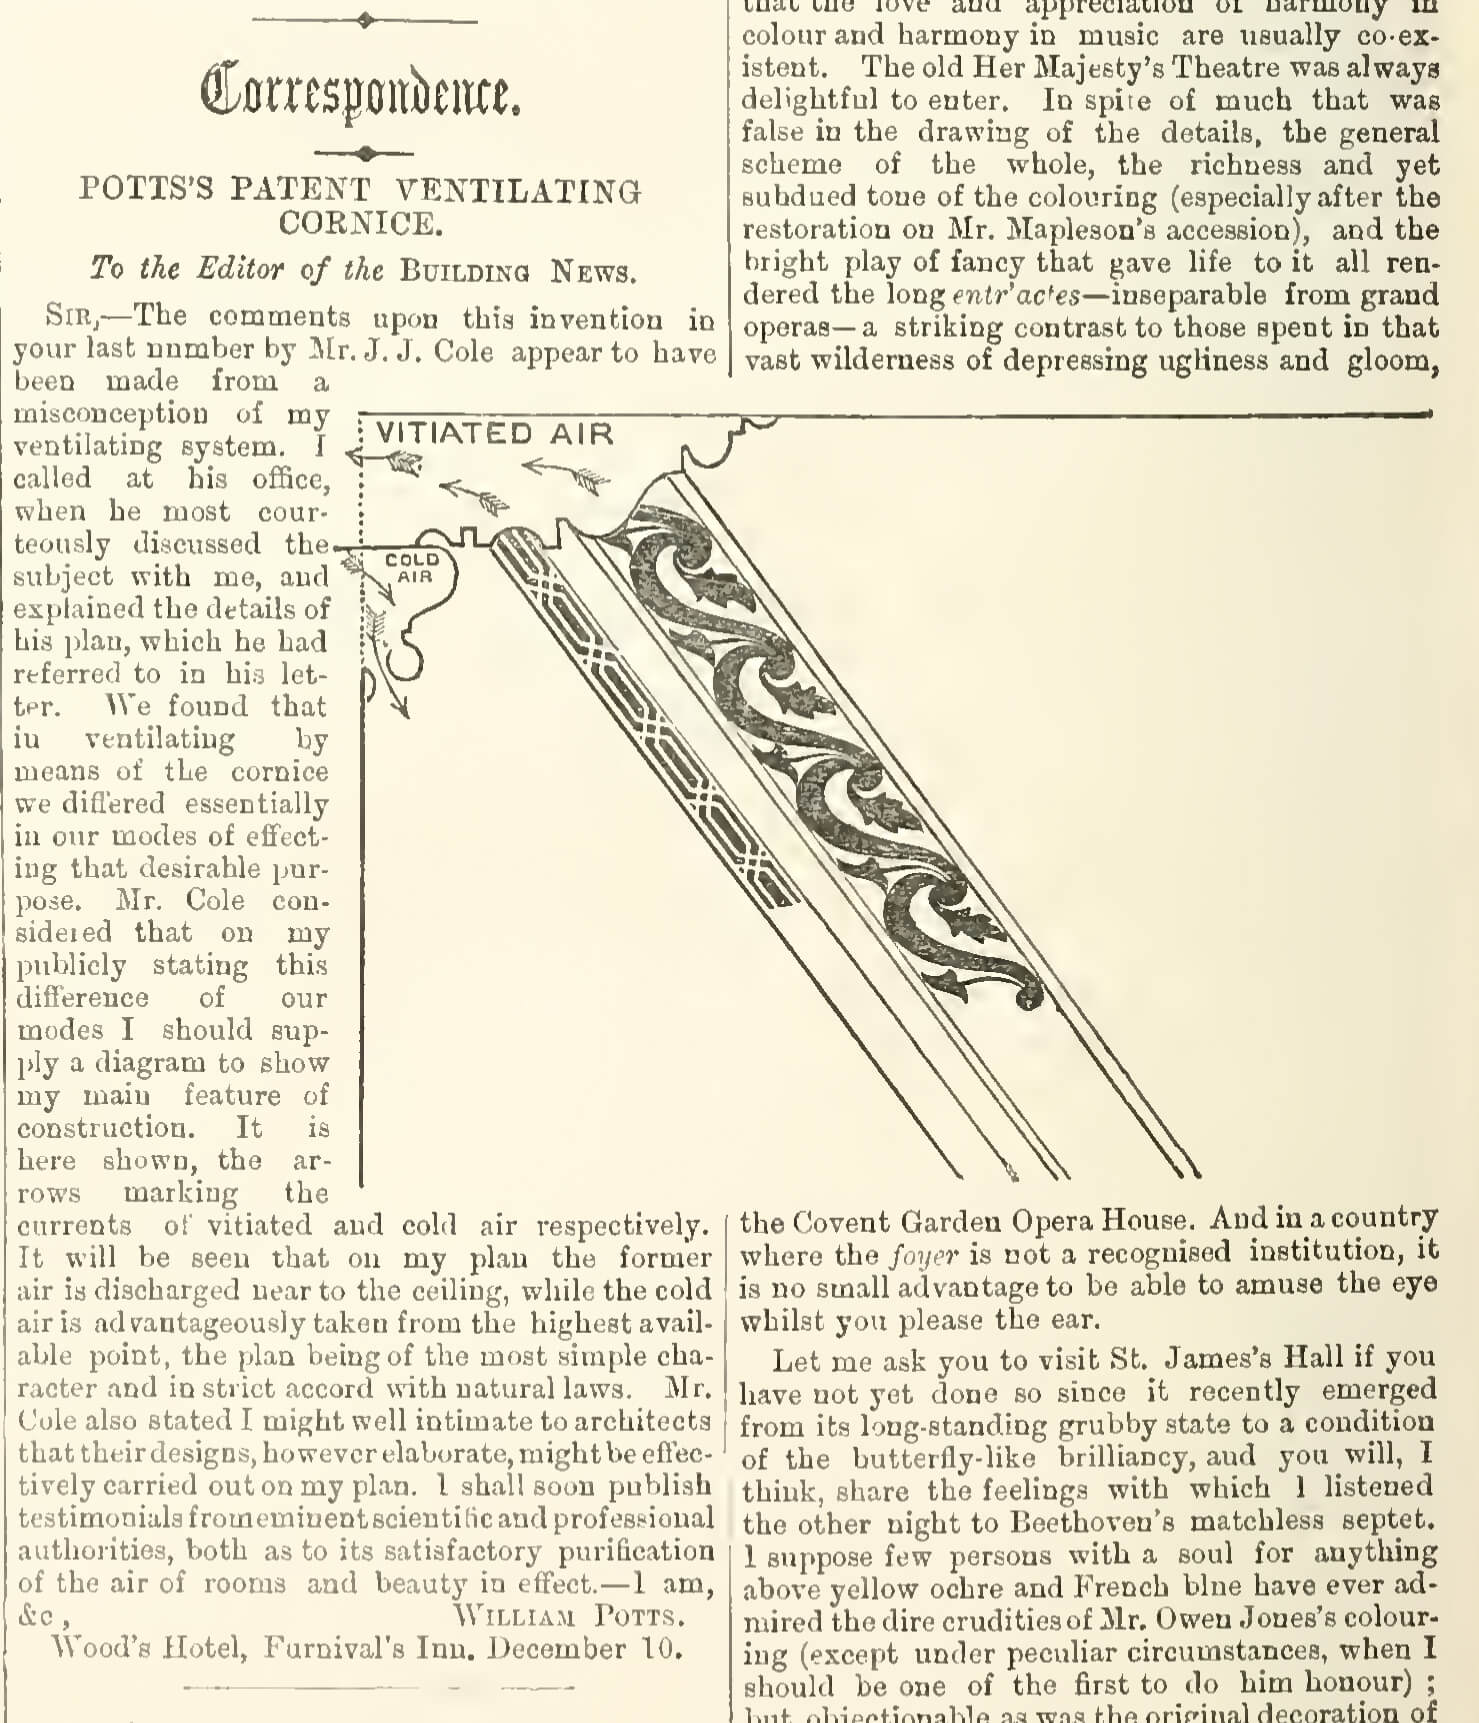 'Pott's Patent Ventilating Cornice', a decorative prototype for a new ventilation system, as featured in The Building News (18 December 1868)